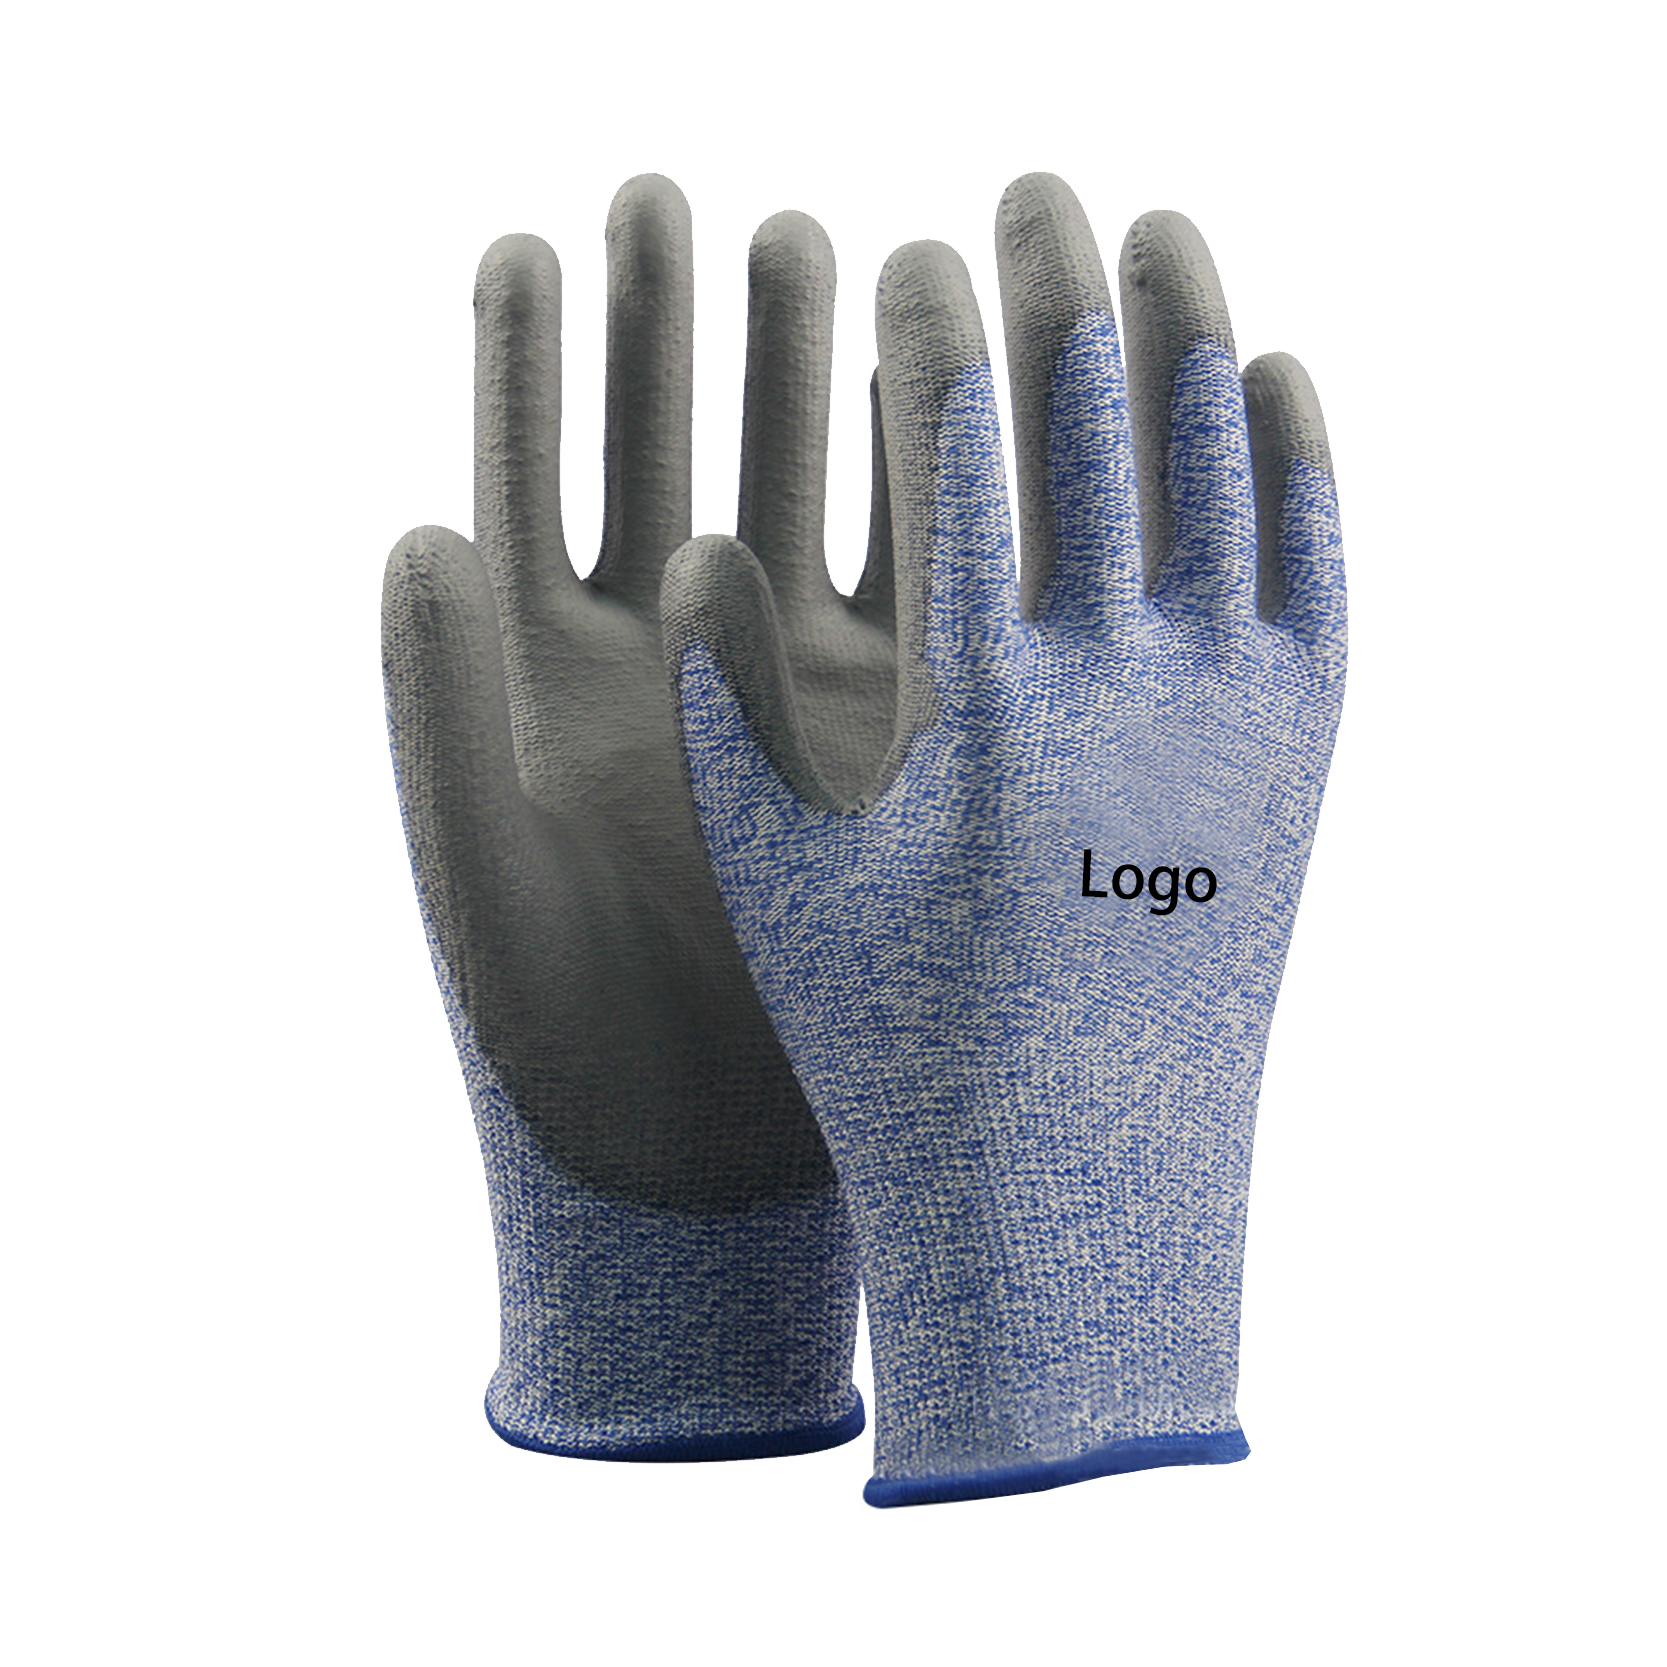 Cut Resistant Hppe Industrial Pu Full Coated Gloves Safety Garden Work Anti Cut Gloves Featured Image